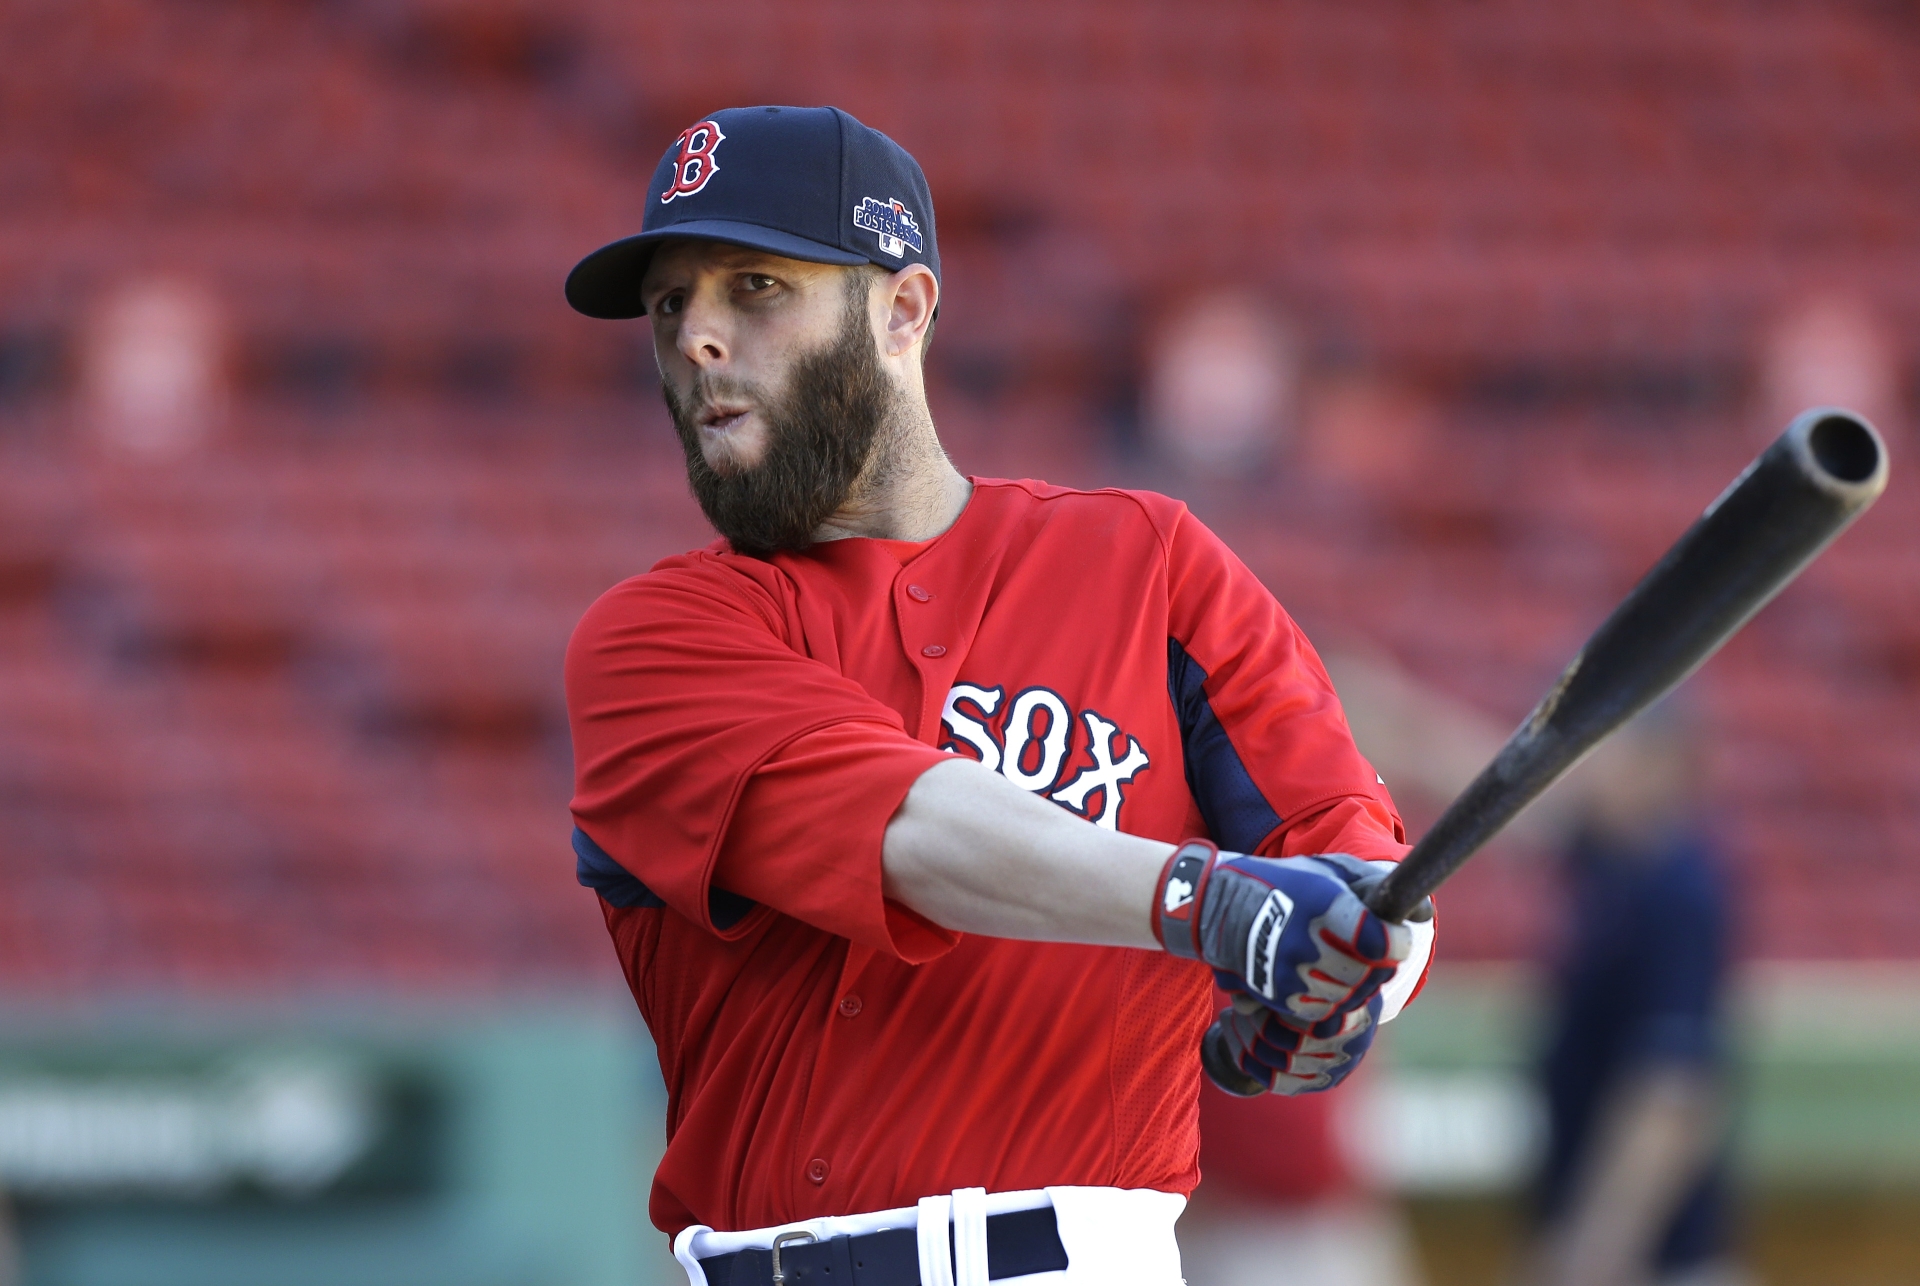 Second baseman Dustin Pedroia is a Red Sox lynchpin. Photo: AP